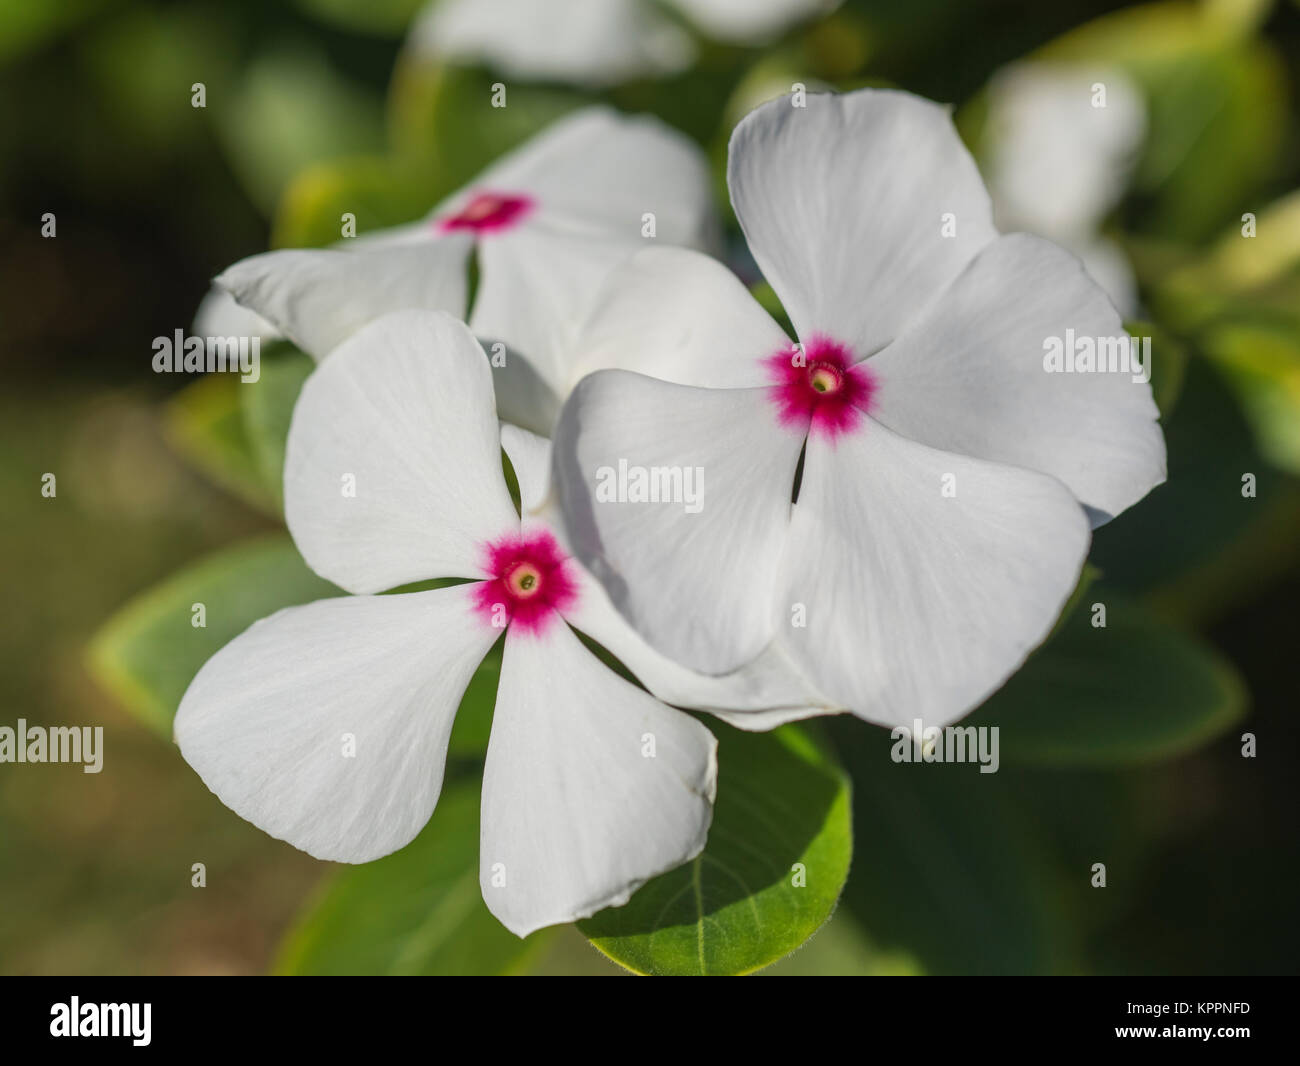 Closeup detail of a white flowering rose periwinkle plant catharanthus roseus in a formal landscaped garden Stock Photo